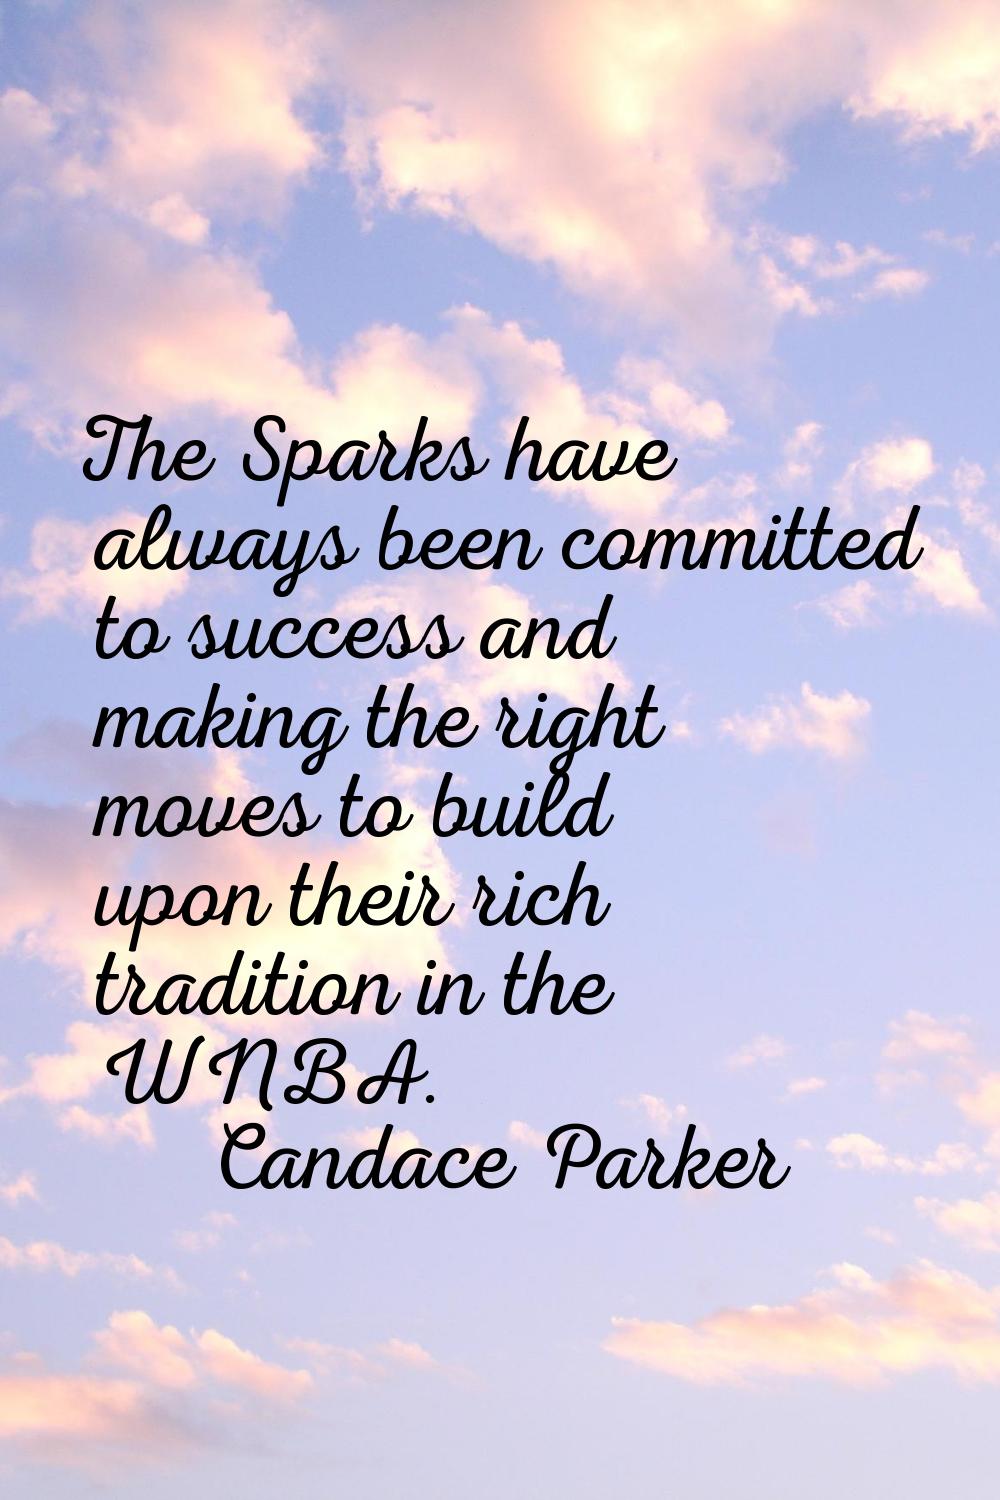 The Sparks have always been committed to success and making the right moves to build upon their ric